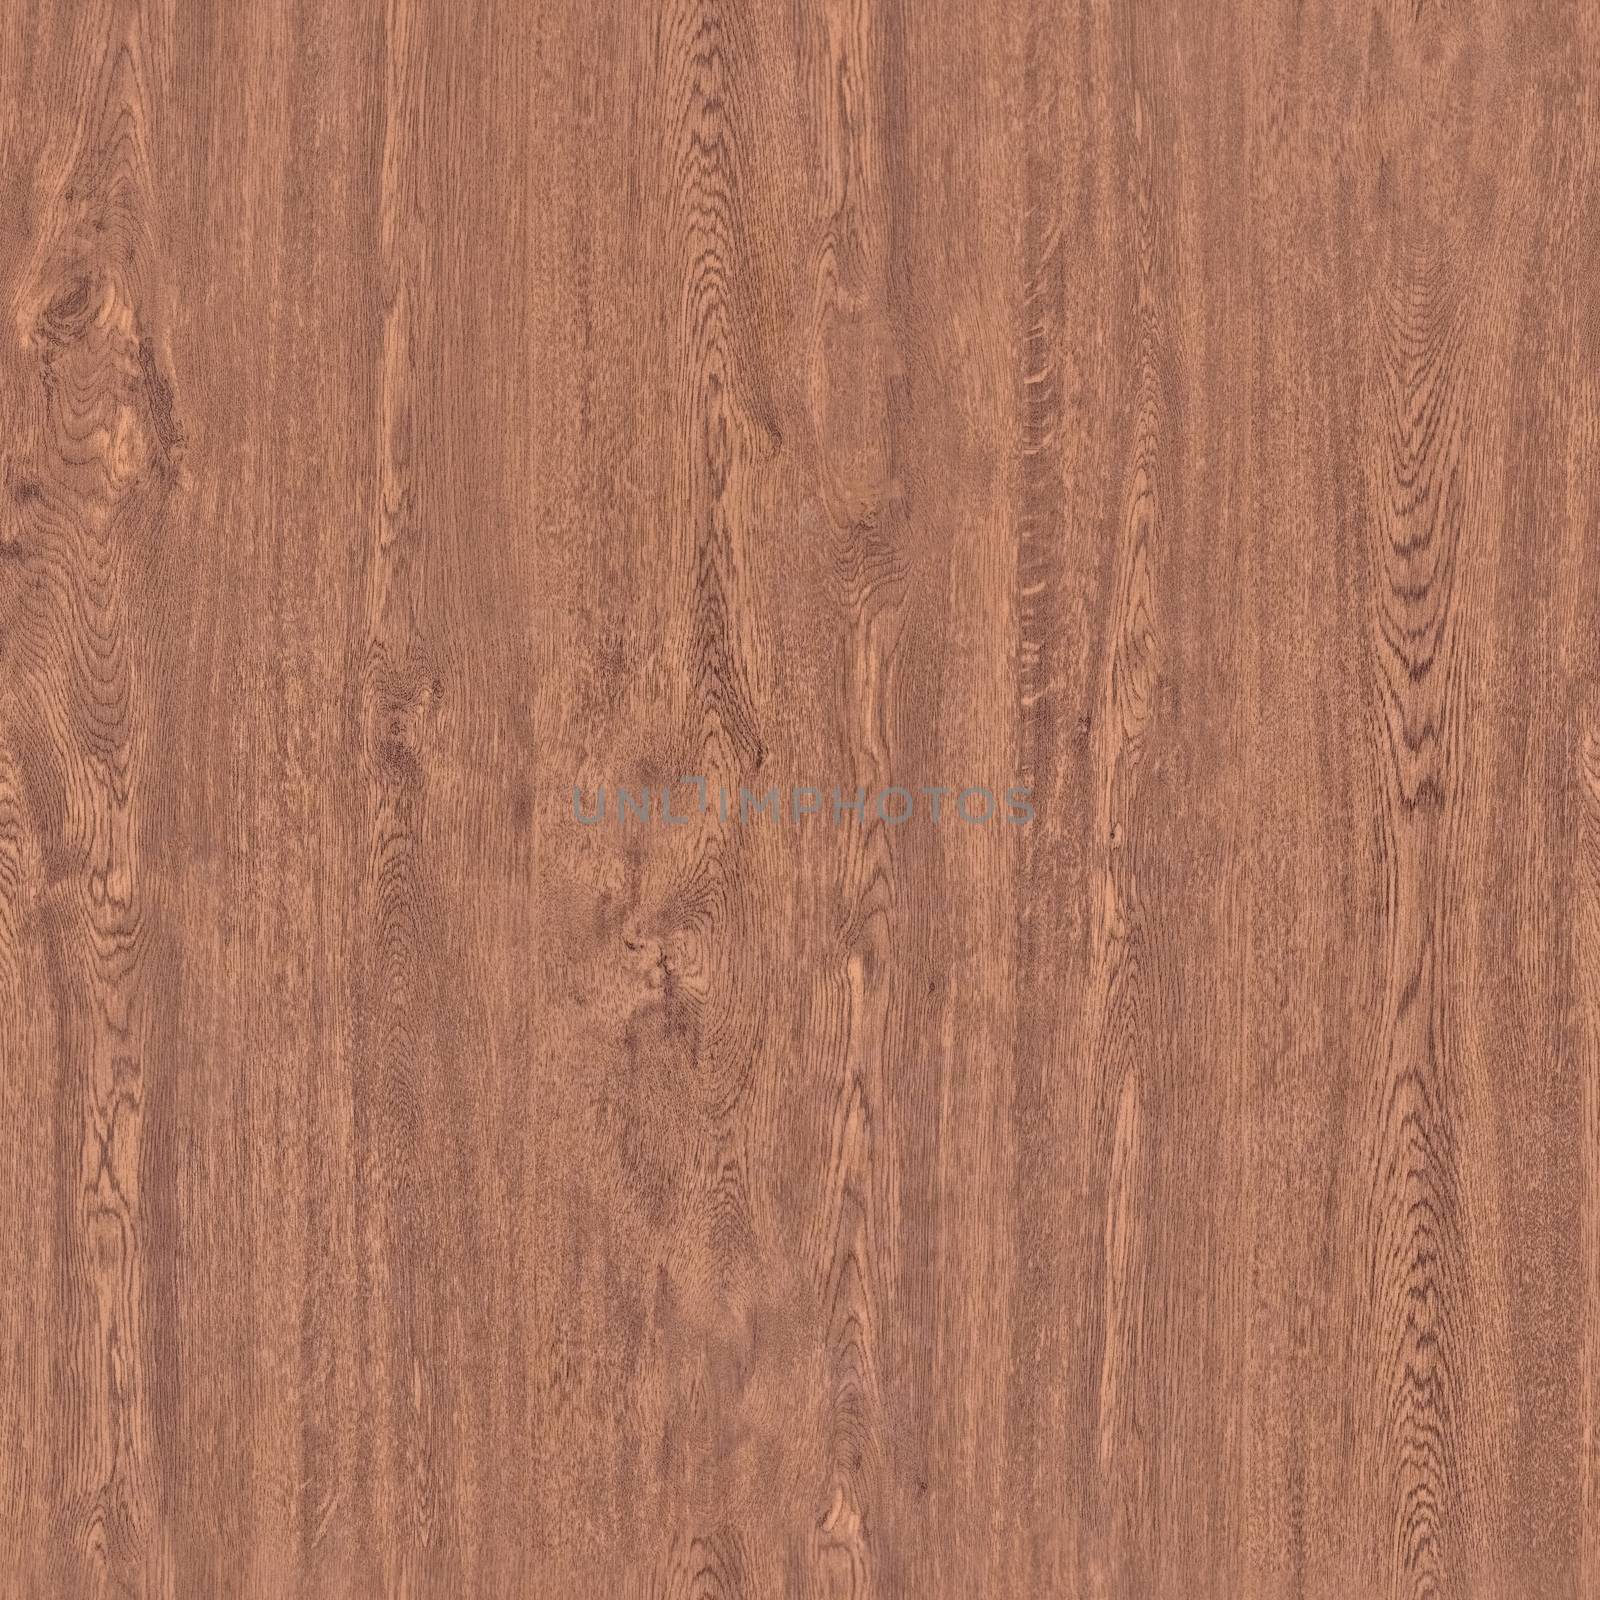 Brown veneer with textured surface imitation wood.Background or texture